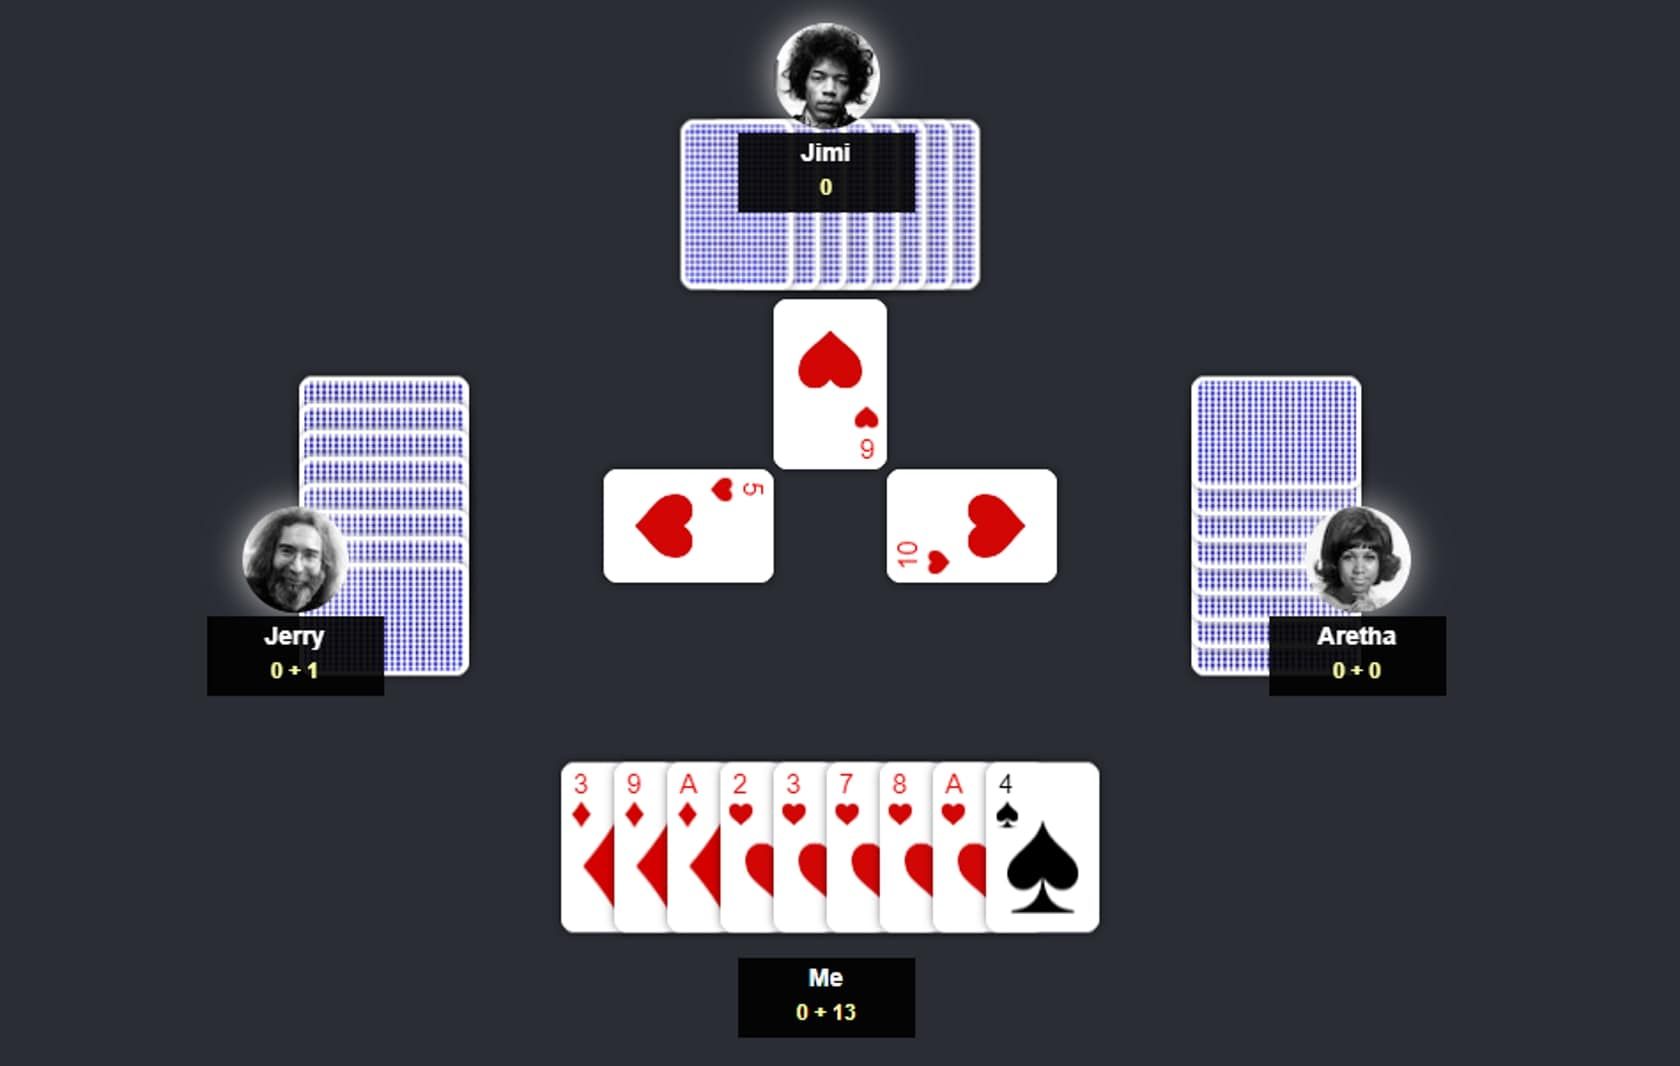 hearts card game play live online